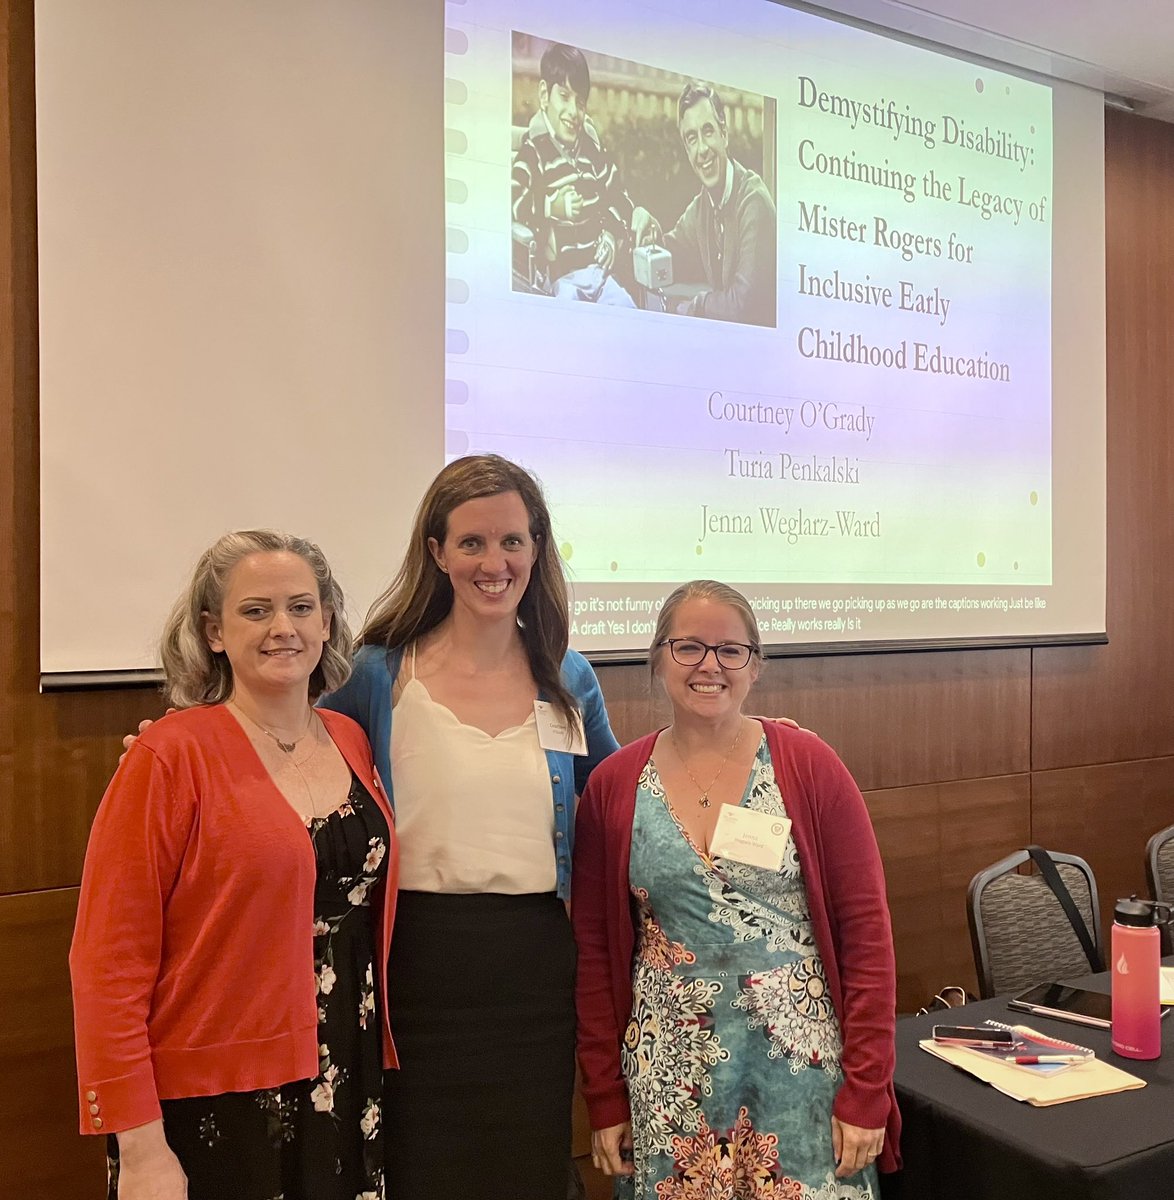 We did it! Demystifying Disability: Continuing the Legacy of Mr. Rogers in Inclusive Early Childhood Education @FredRogersInst Great session with amazing new friends from across the country who are doing good work to support children! @TuriaMarie @CourtneyOGrady1 @unlvcoe @unlv